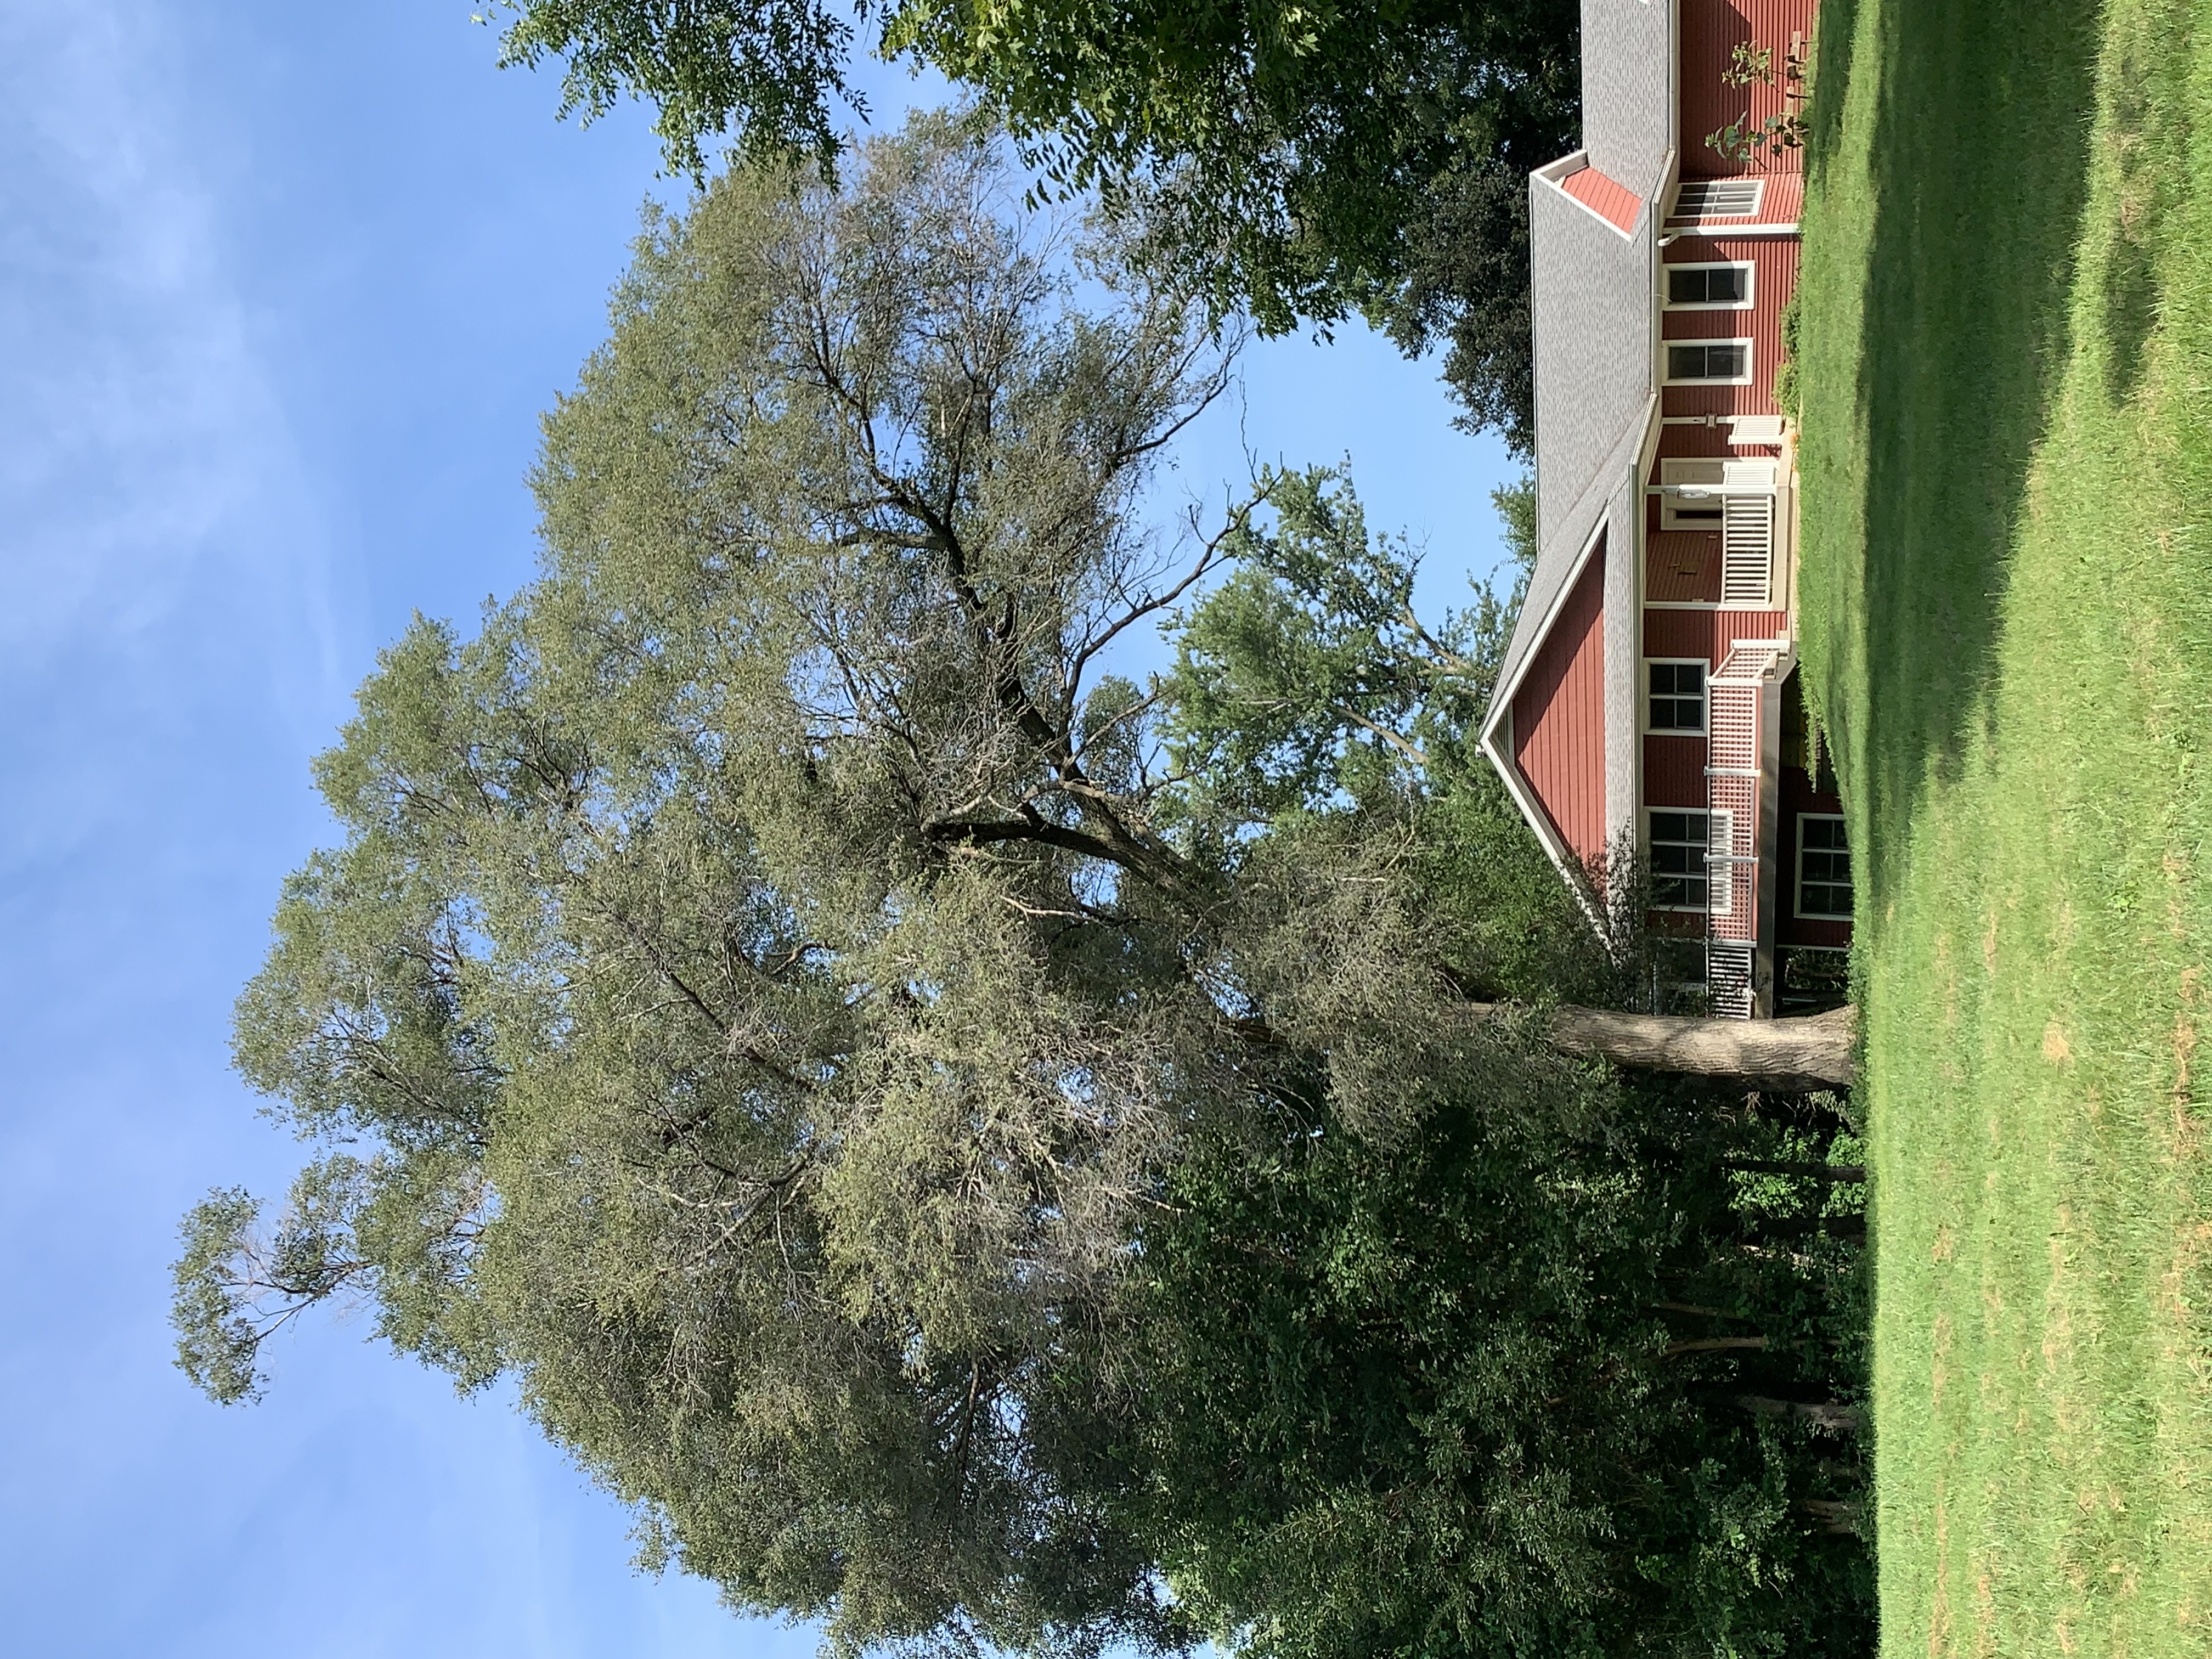 Large shade tree stands in a green yard, towering over the author’s red house. Siberian Elm.